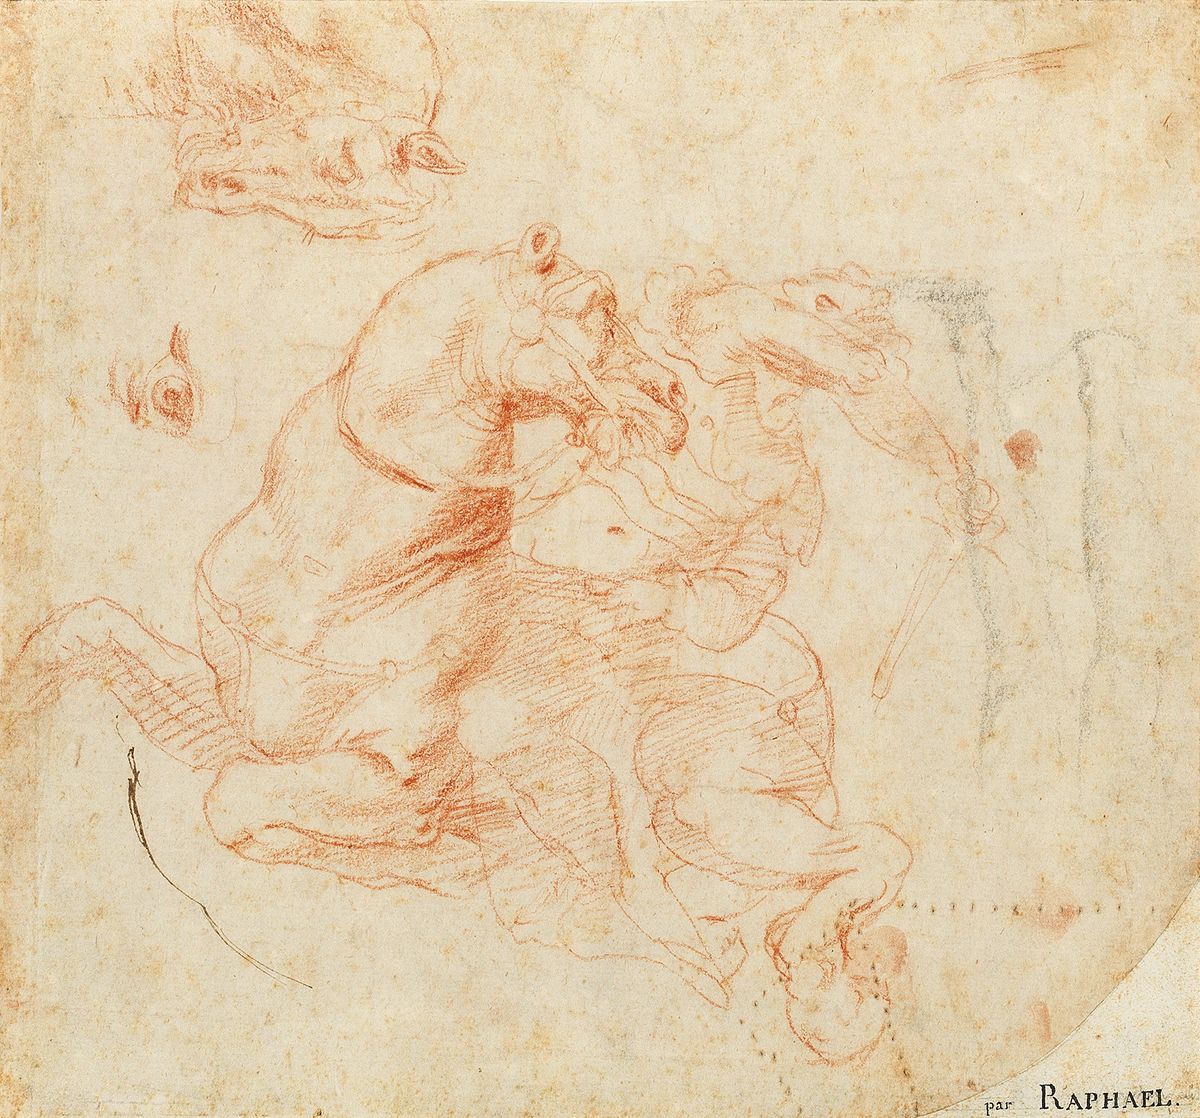 Raphael’s Study for the Battle of the Milvian Bridge is up for auction in October
© Dorotheum